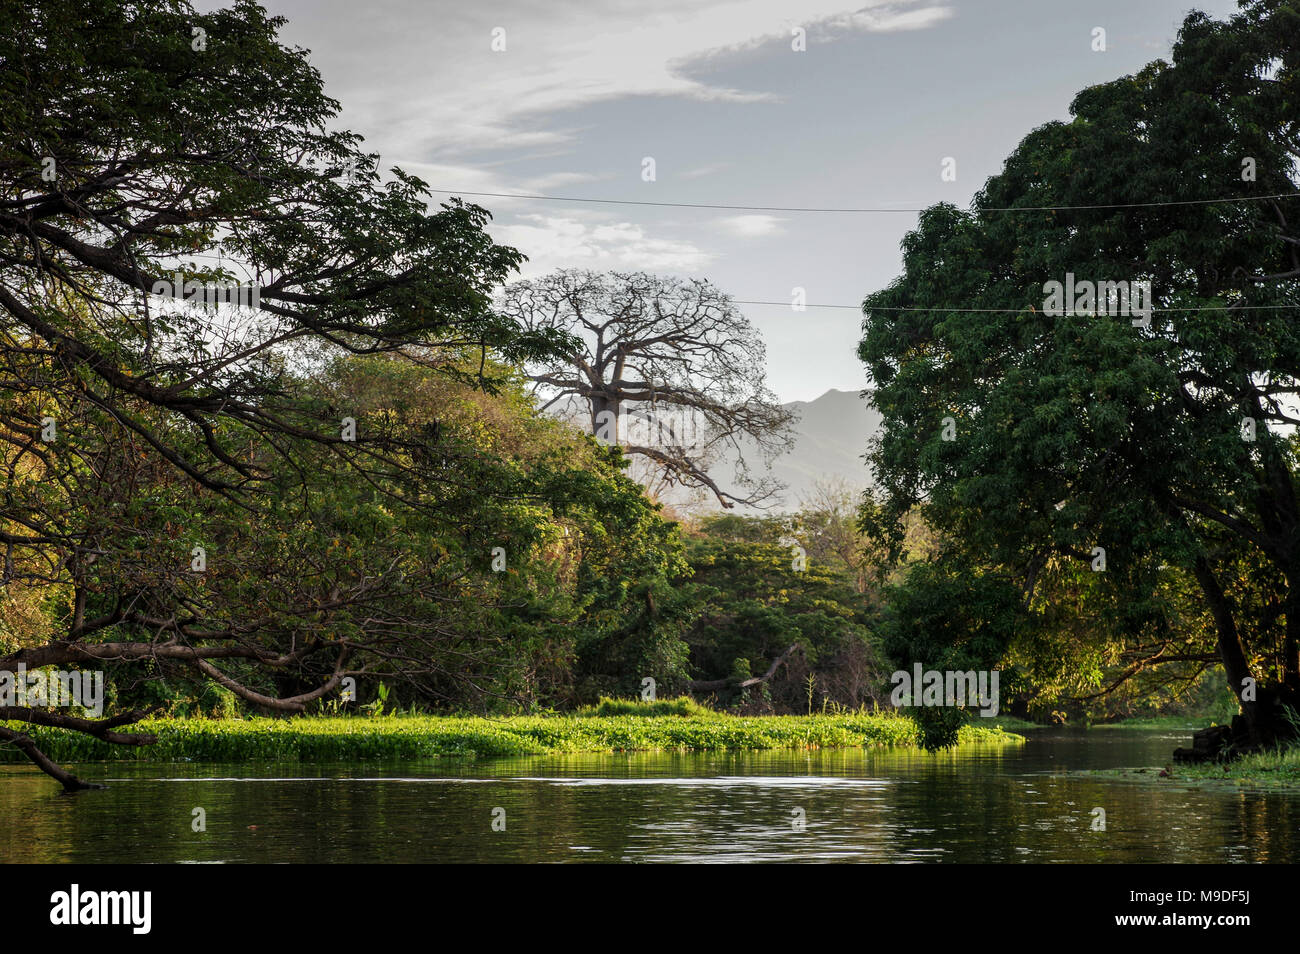 Lush vegetation covering the Islets of Granada on Lake Cocibolca in Nicaragua, Central America Stock Photo